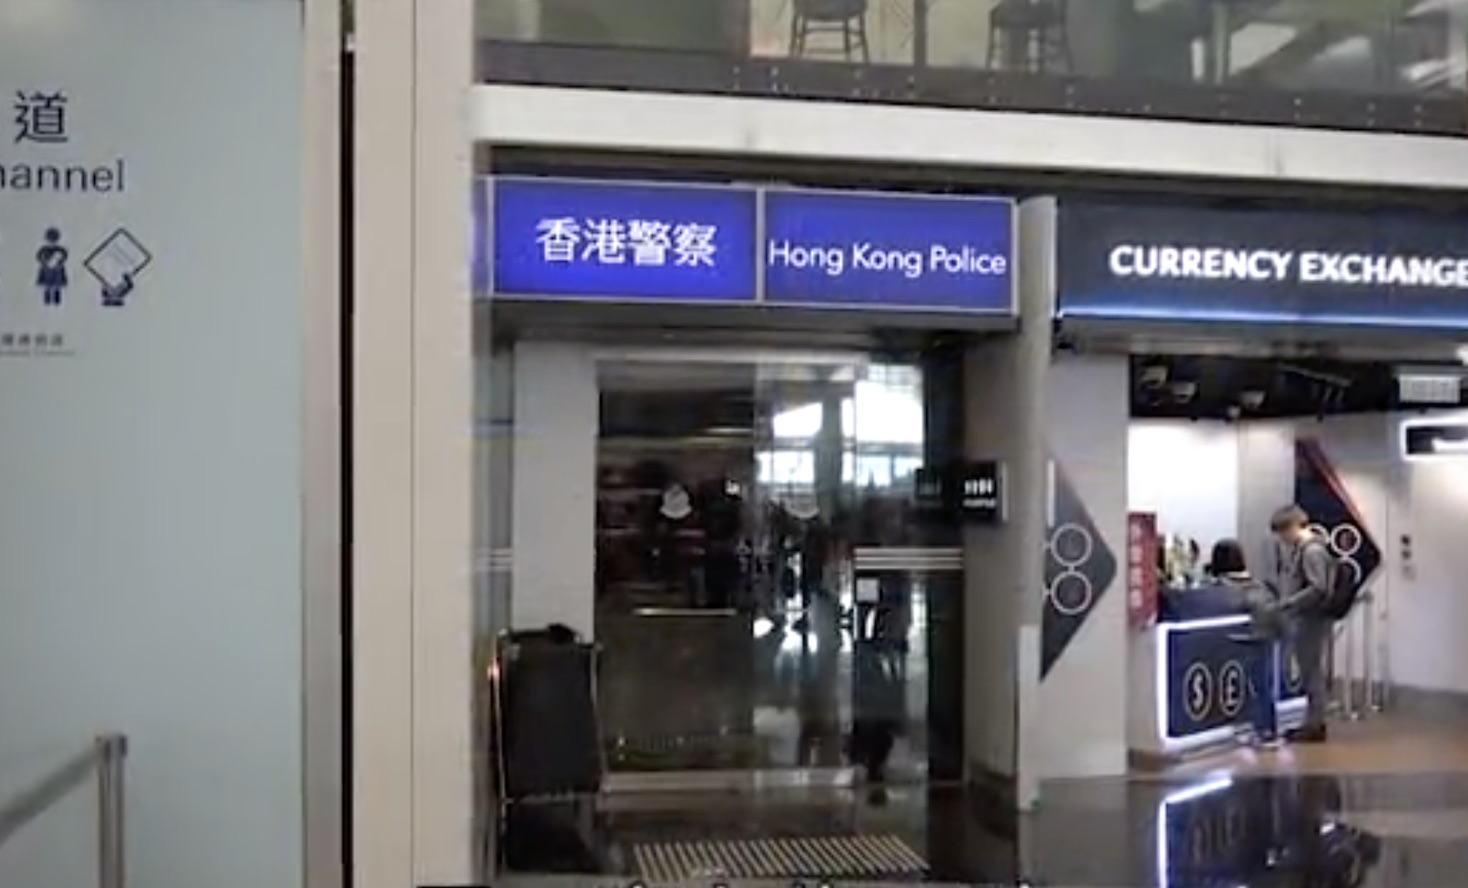 The police report center at the airport. Screengrab via Apple Daily.